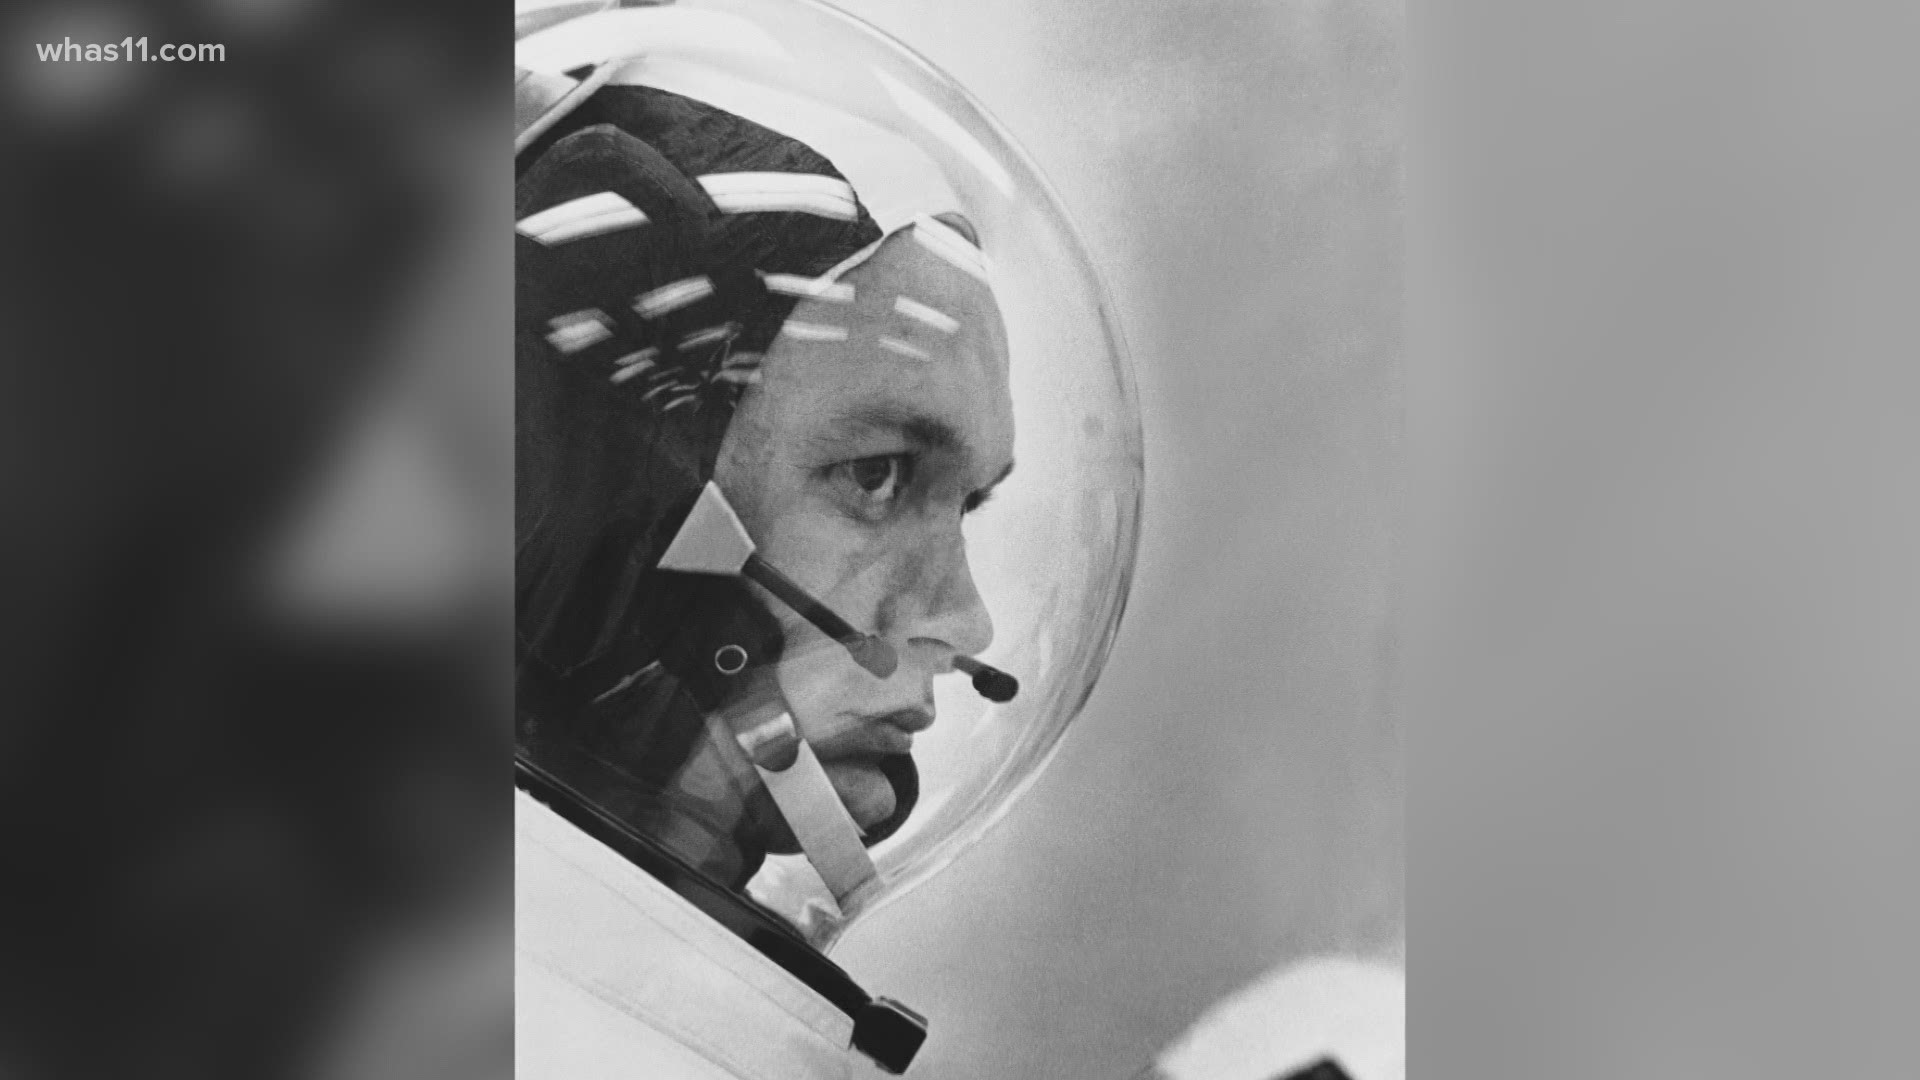 Michael Collins, the one astronaut who did not step foot on the moon during the famed Apollo 11 mission, has died at the age of 90.